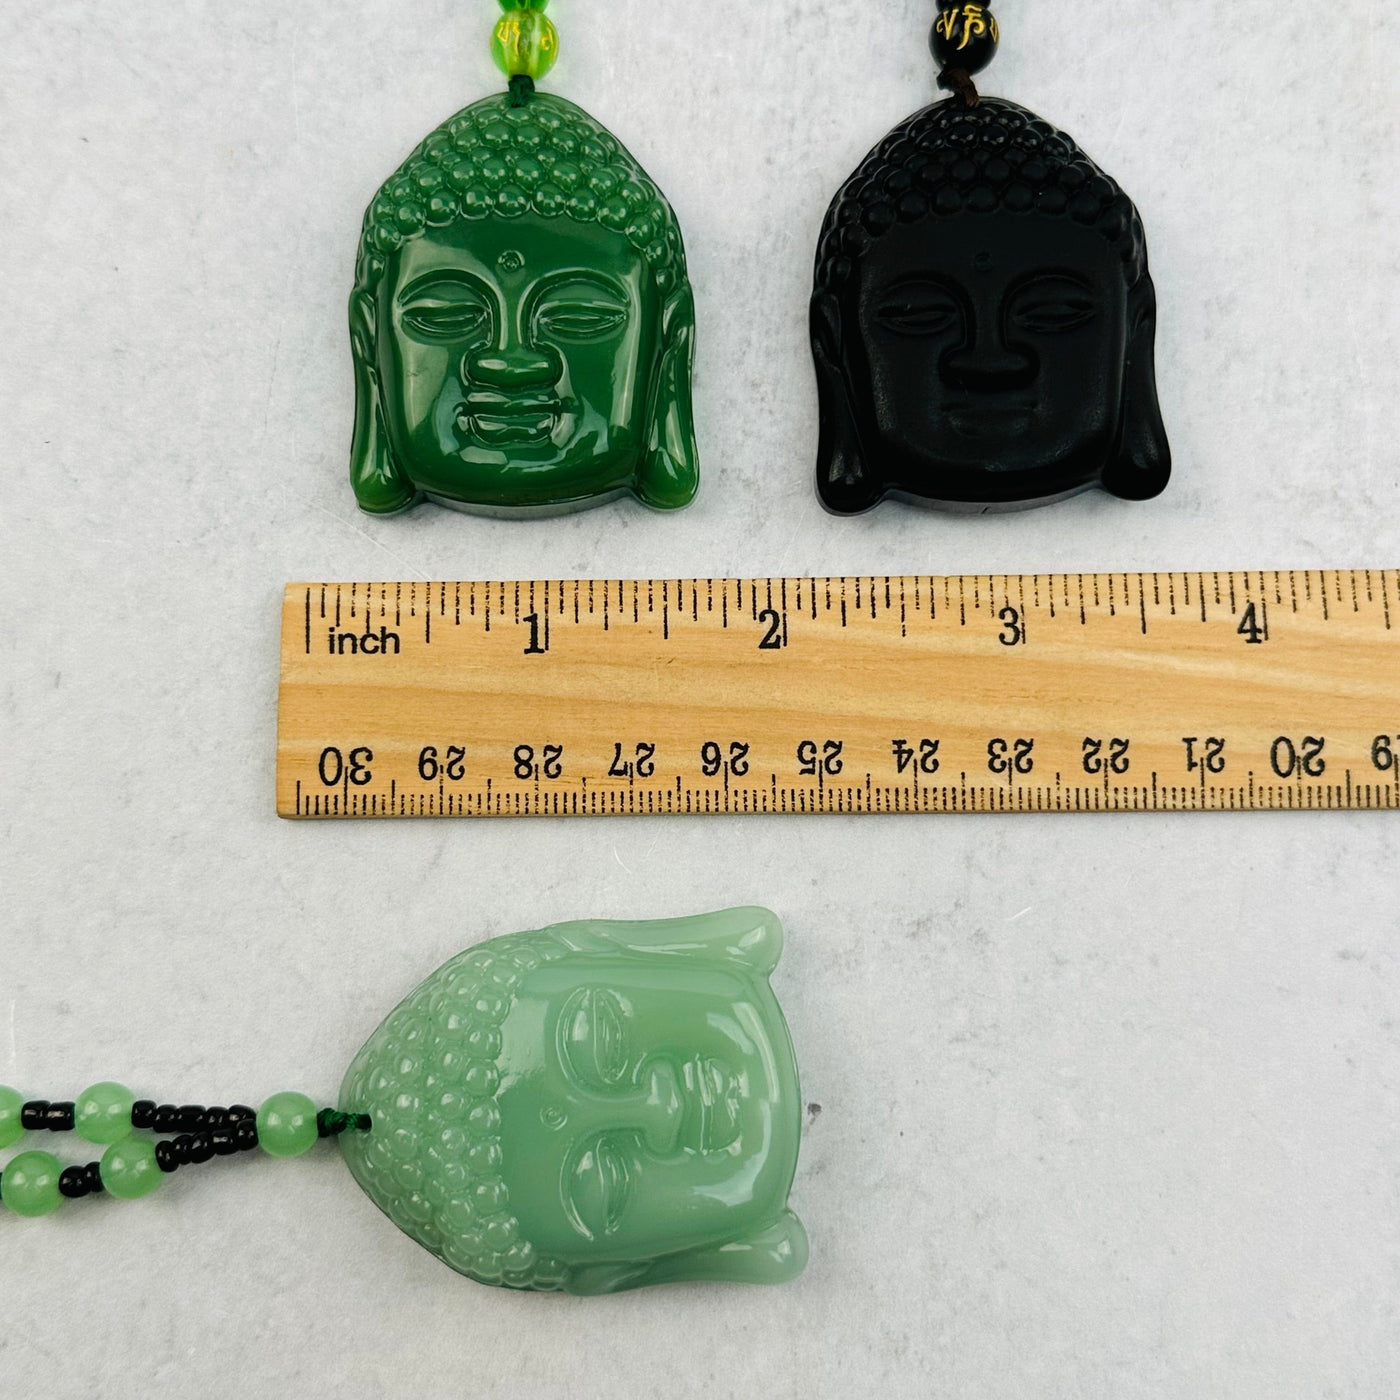 carved gemstones next to a ruler for size reference 